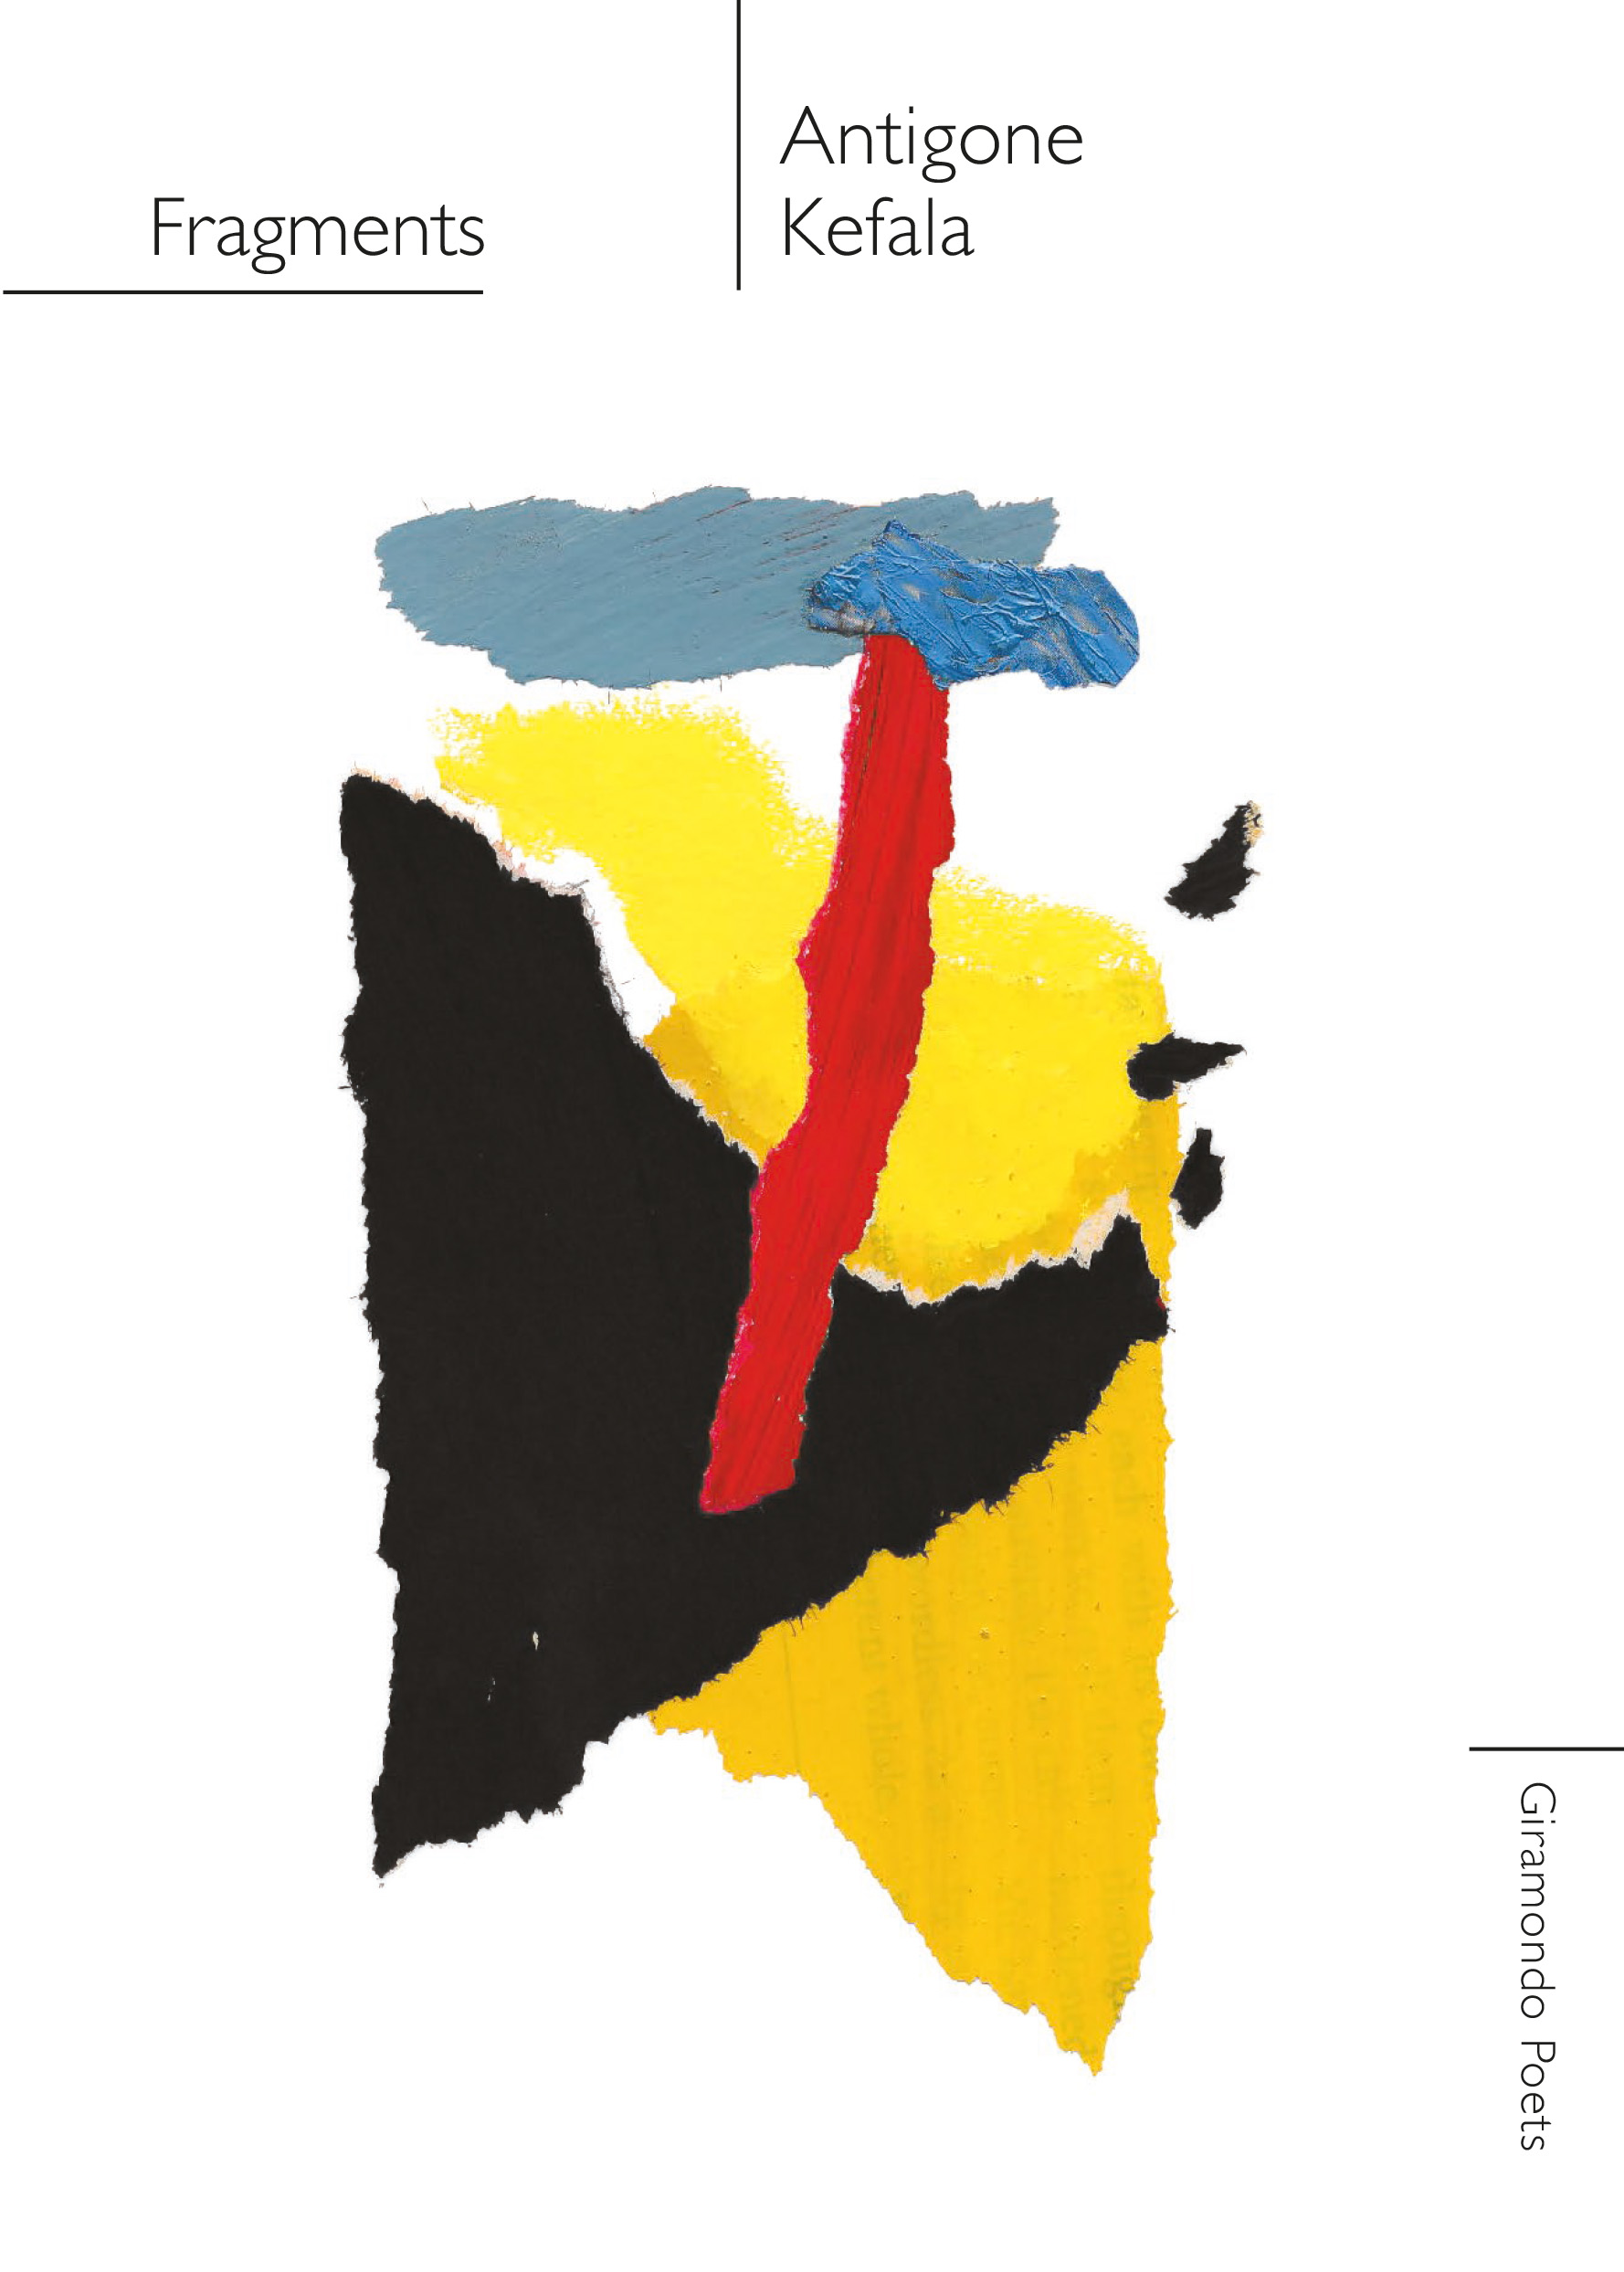 The cover of the poetry collection Fragments by Antigone Kefala. Brushtrokes of yellow, blue and black are on a white backround.